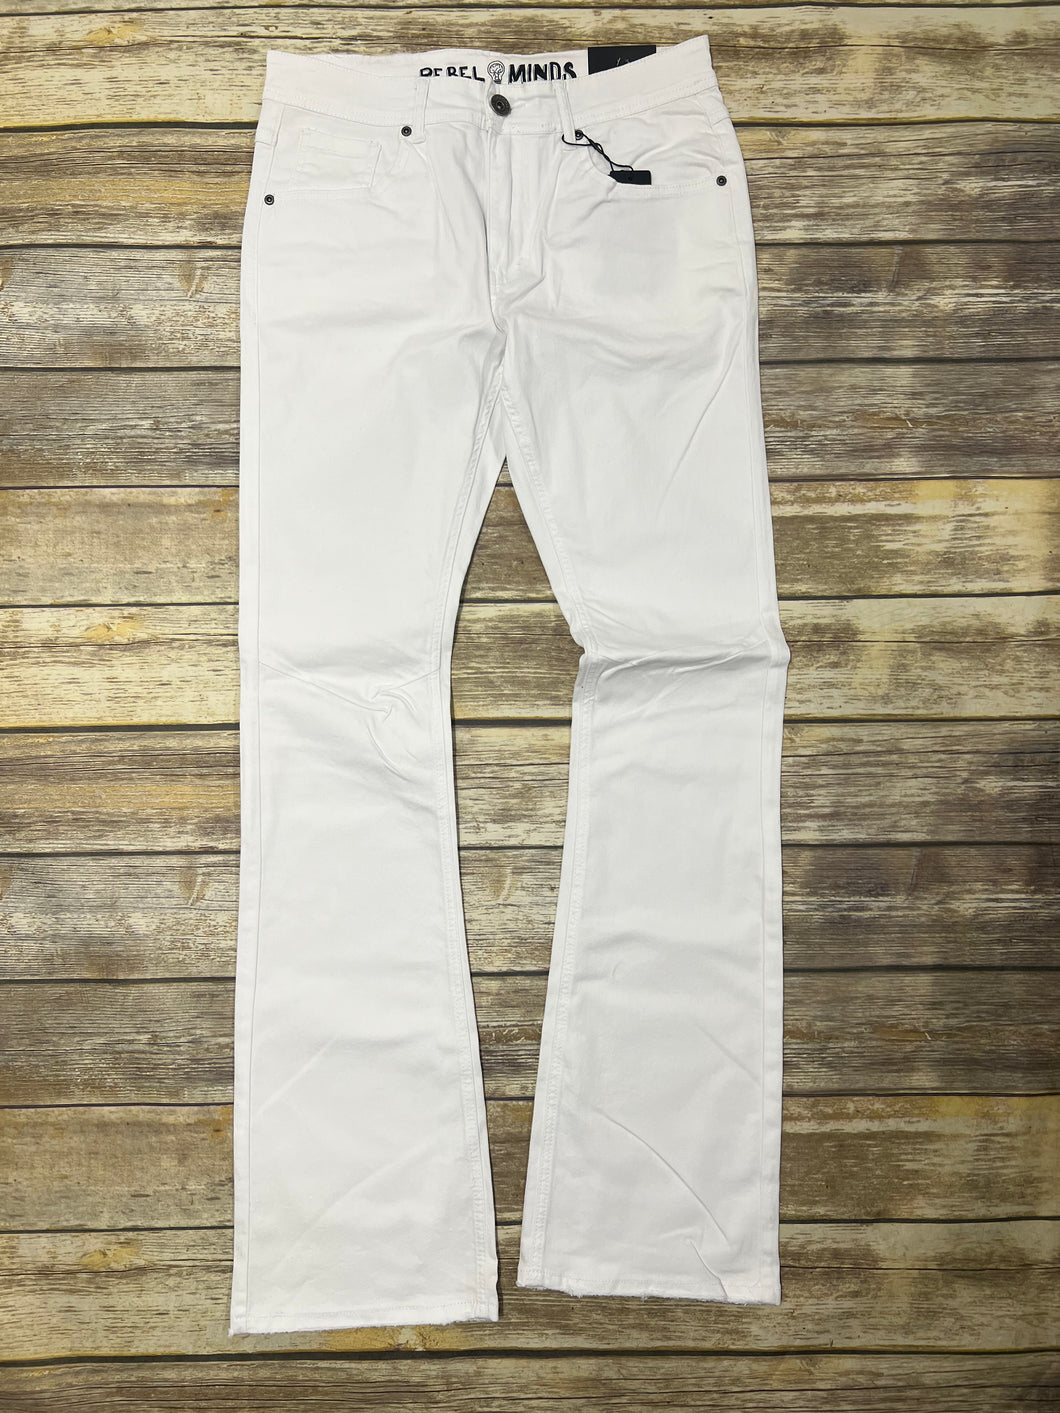 Rebel Minds - Rip and Repair Denim STACKED FIT 100-660 White